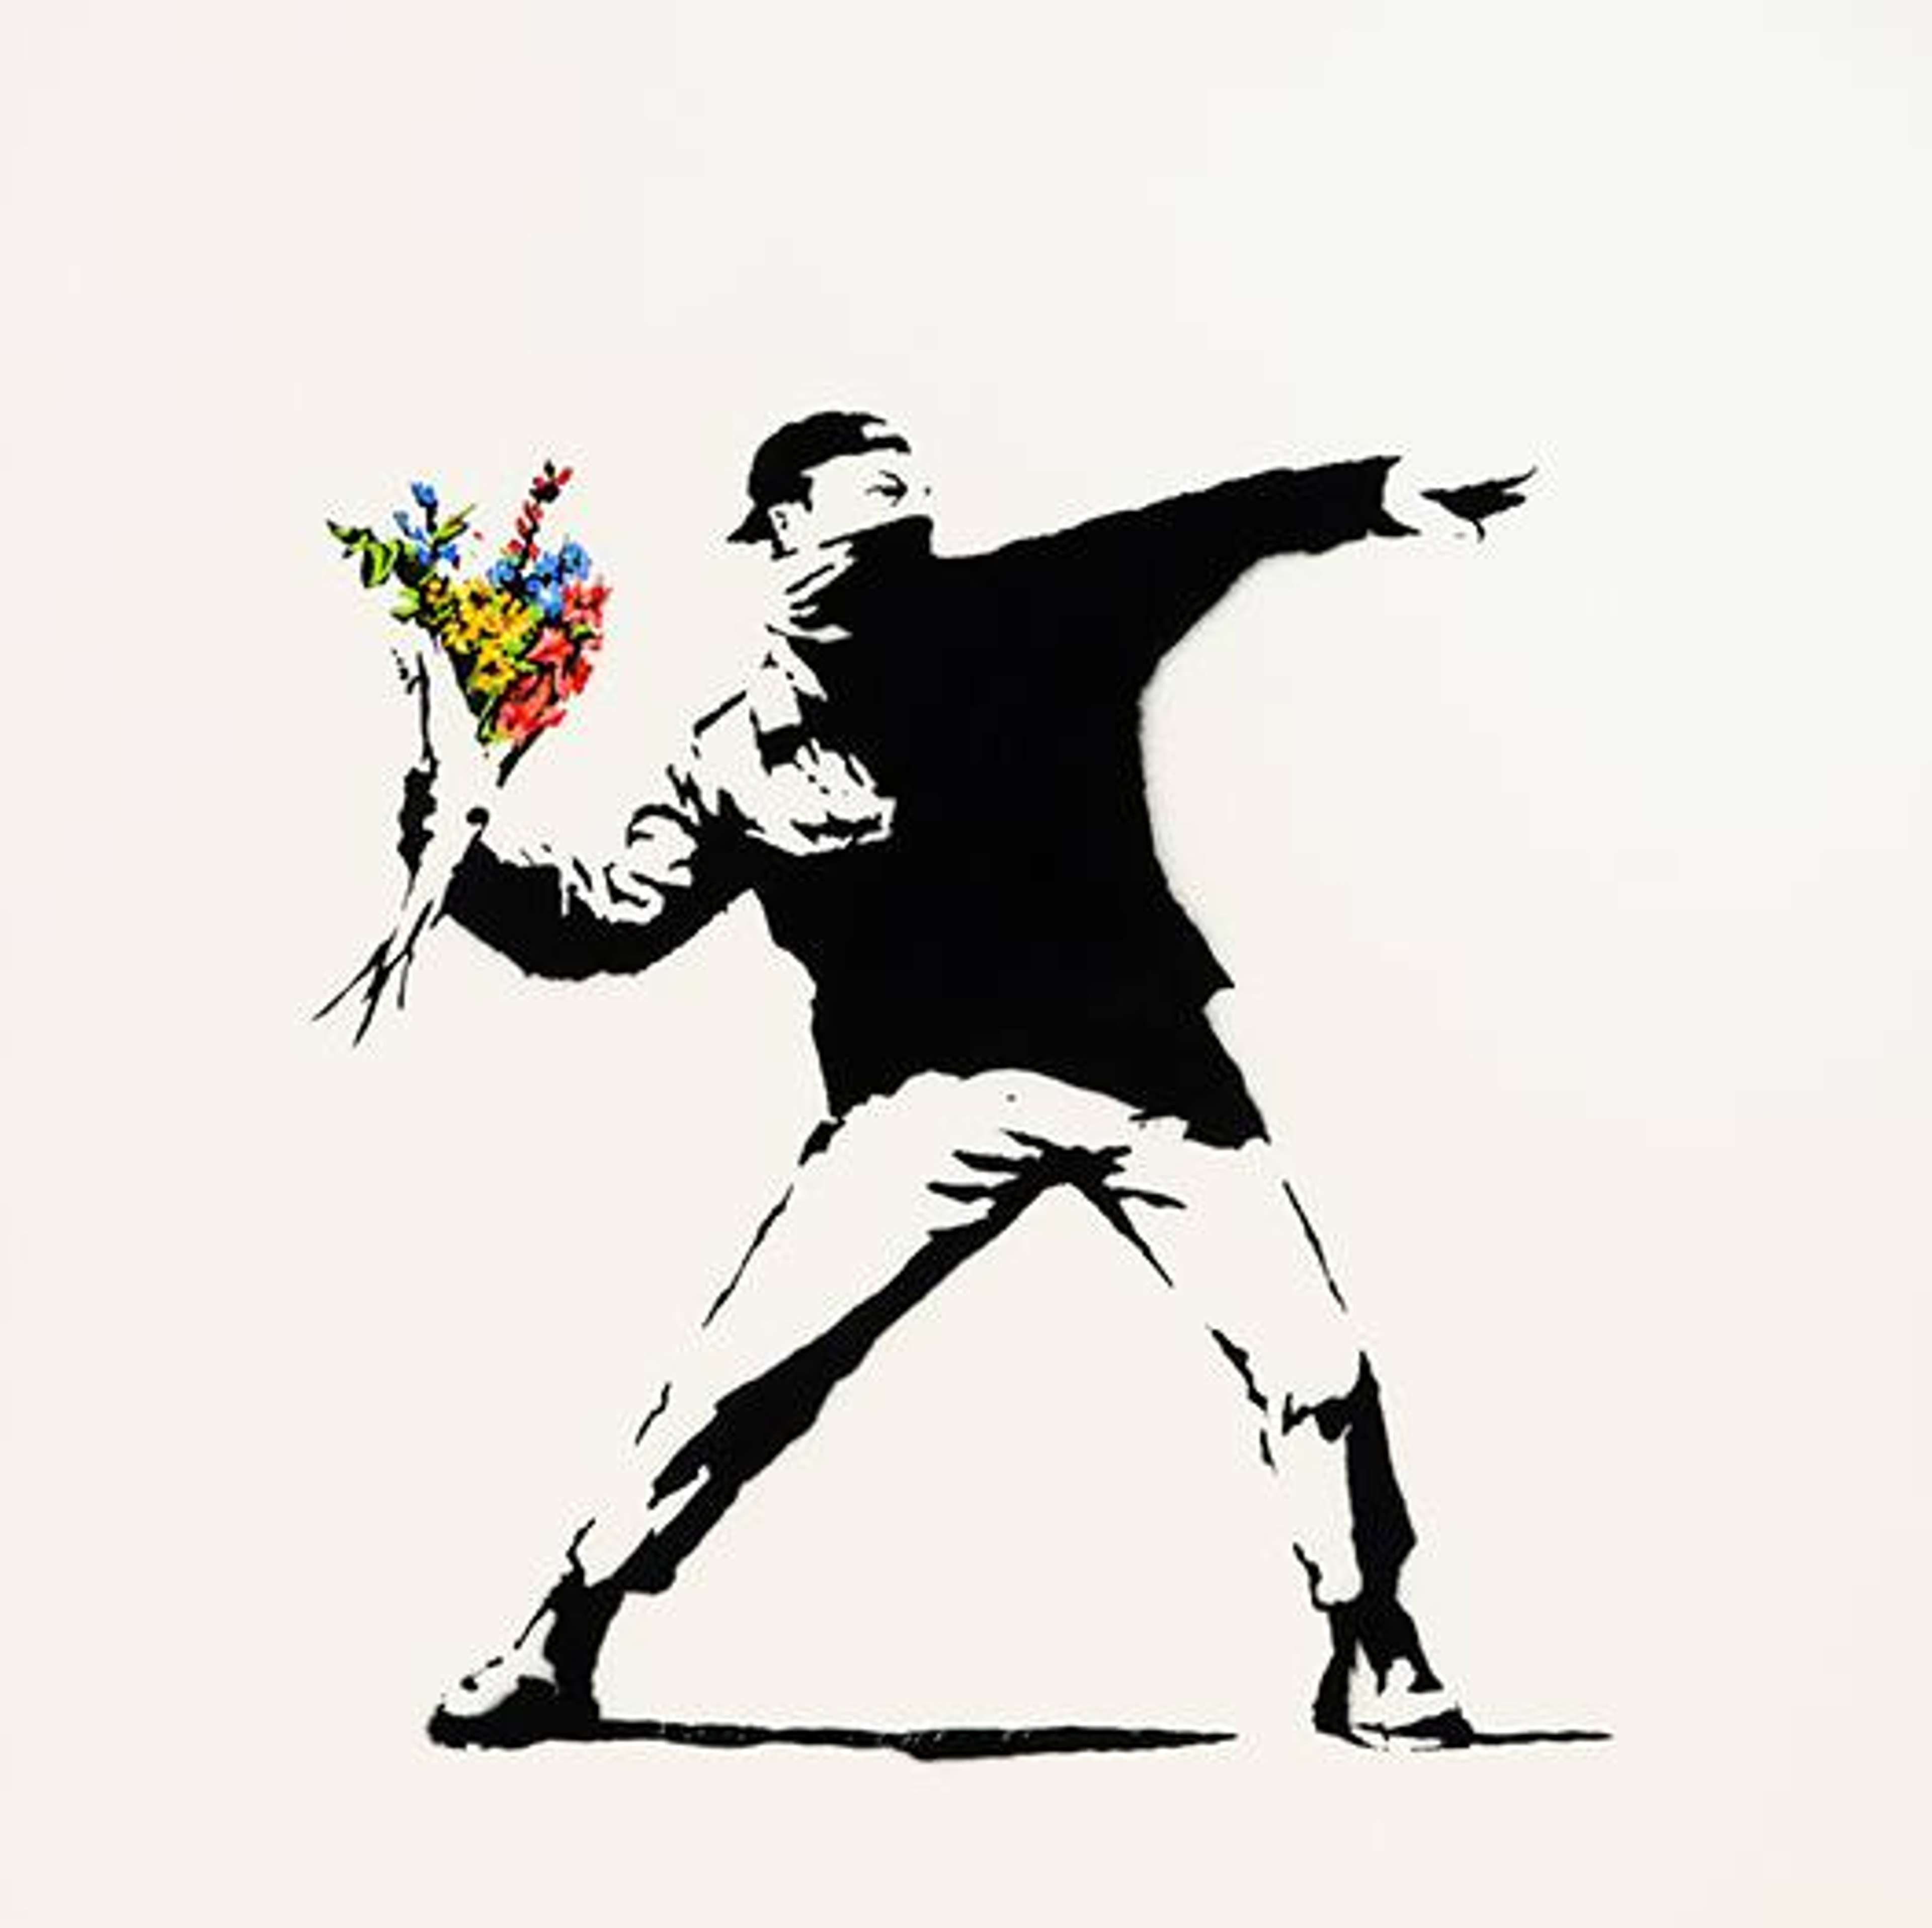 Love Is In The Air by Banksy